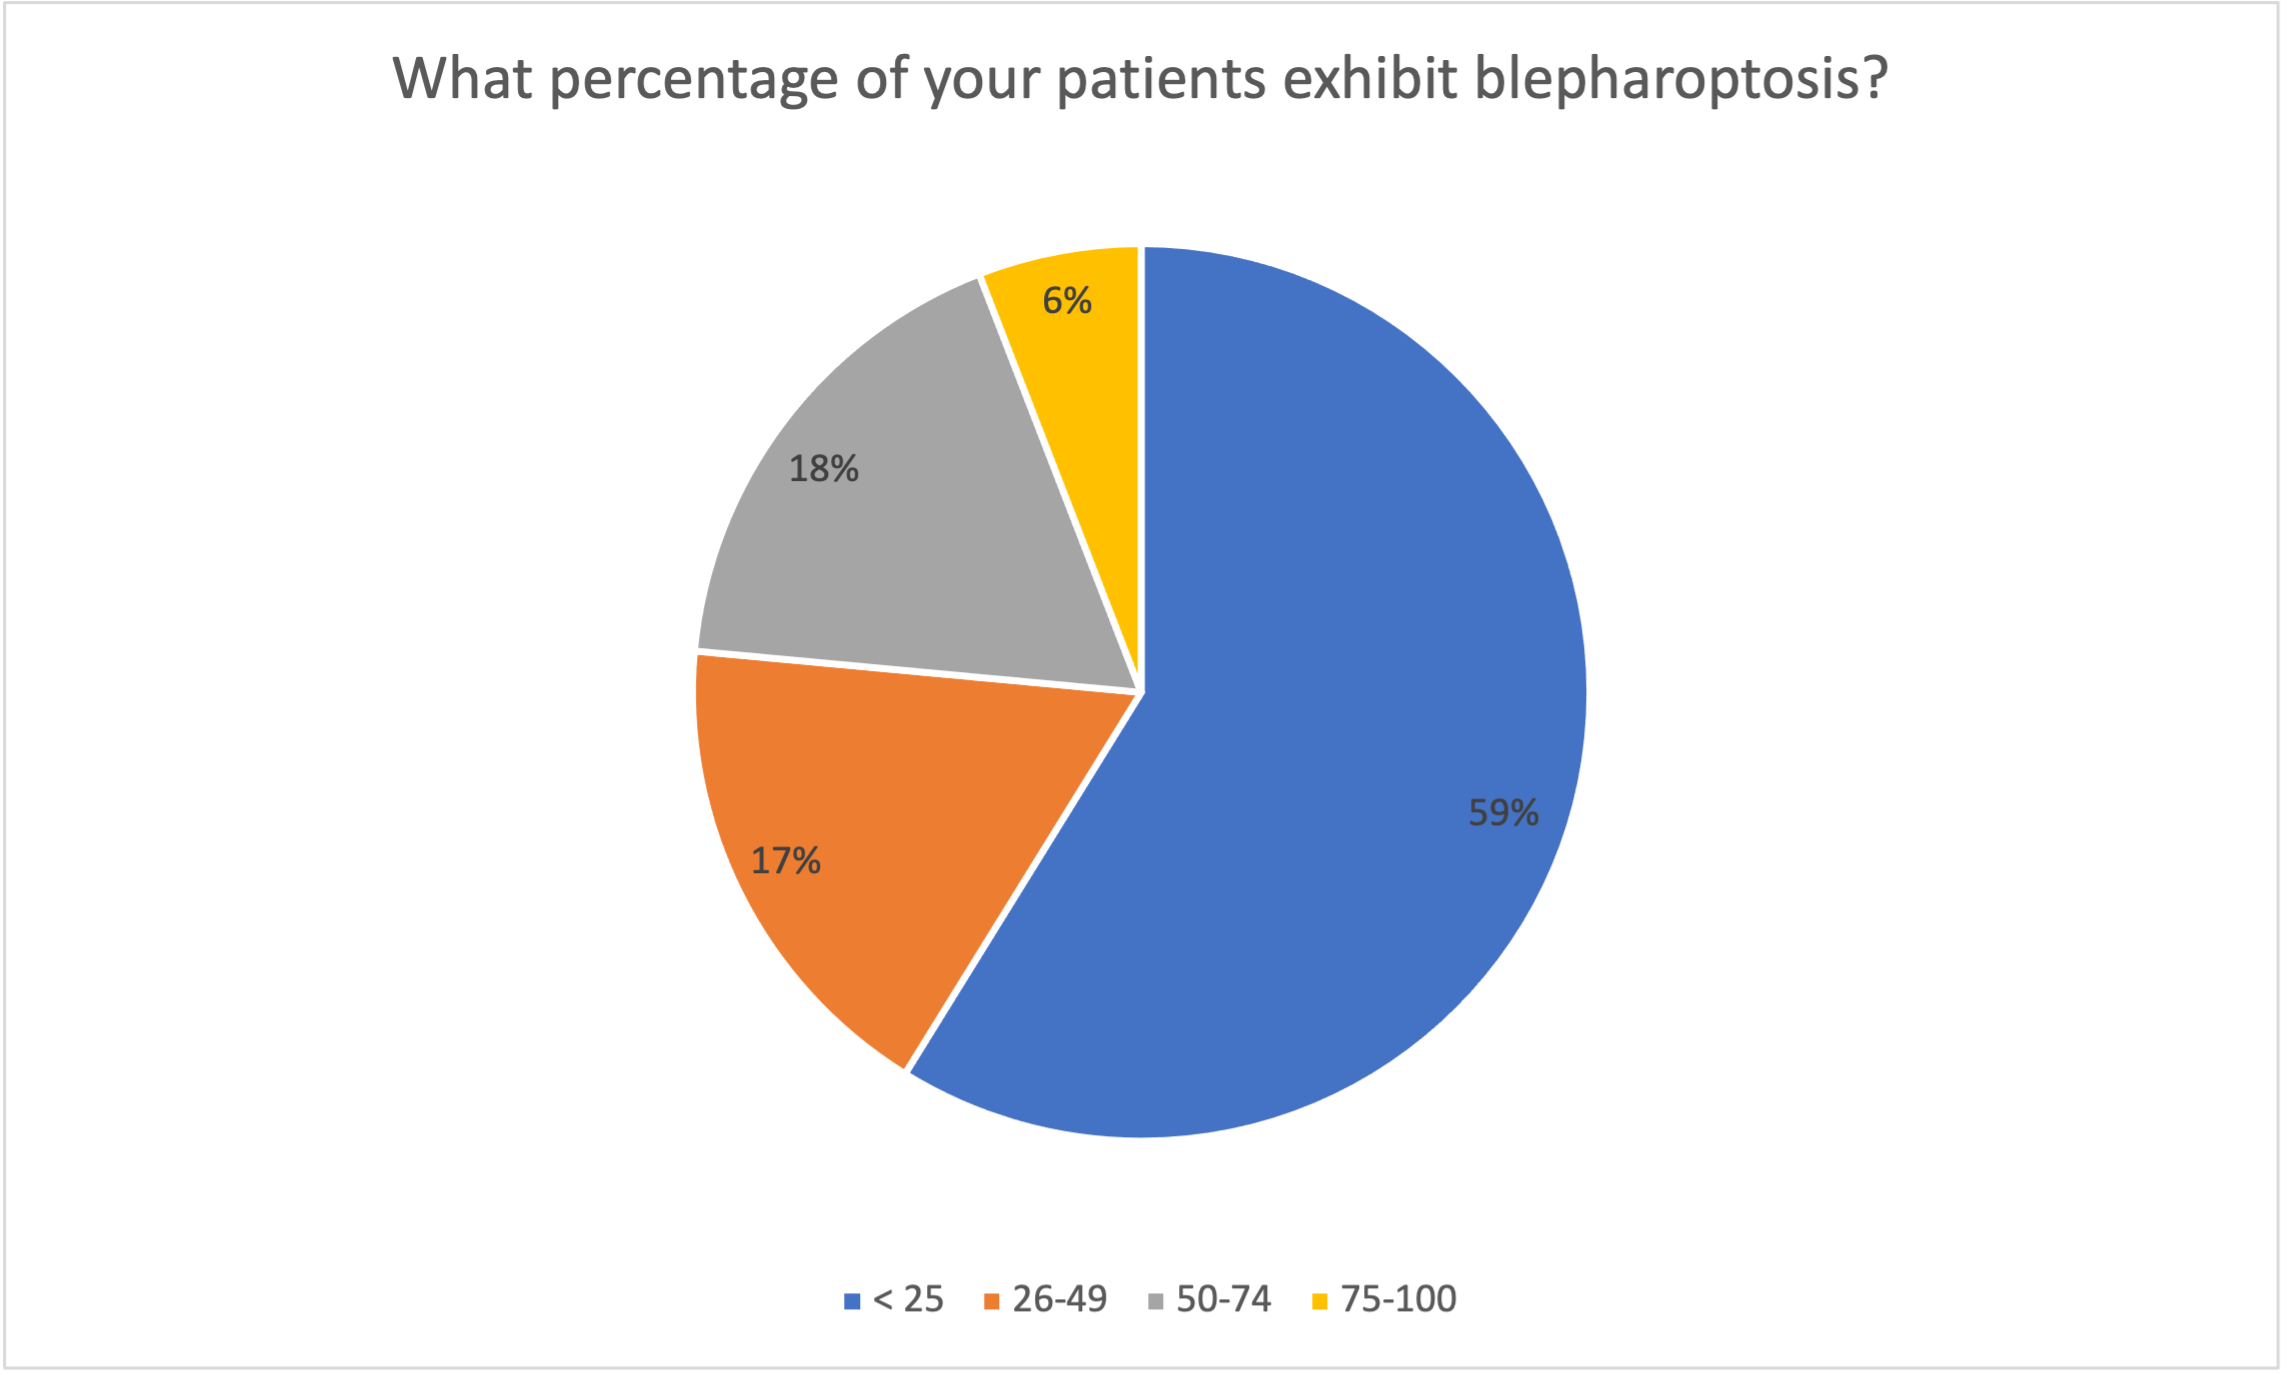 Poll results: What percentage of your patients exhibit blepharoptosis?